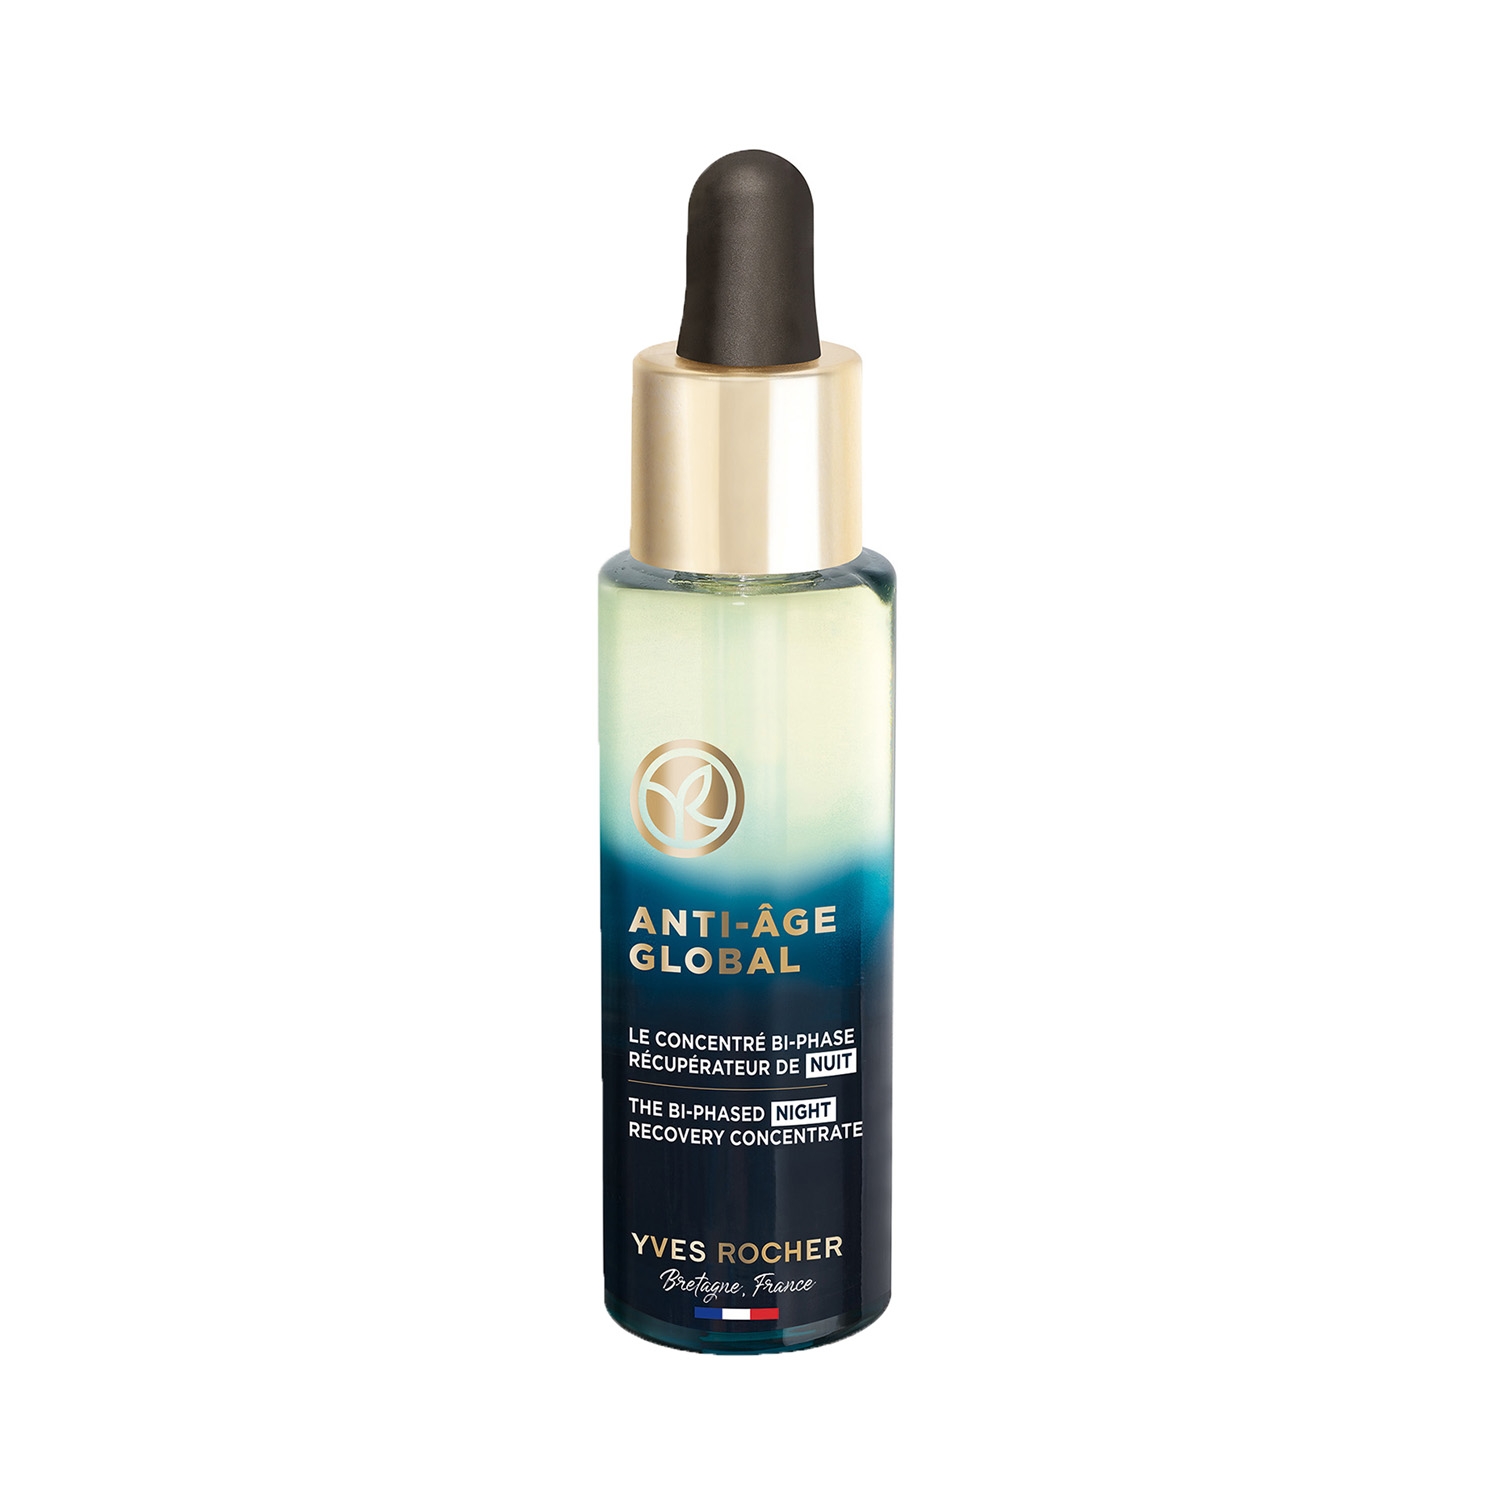 Yves Rocher | Yves Rocher Anti Age Global The Bi-Phased Night Recovery Concentrate Serum (30ml)